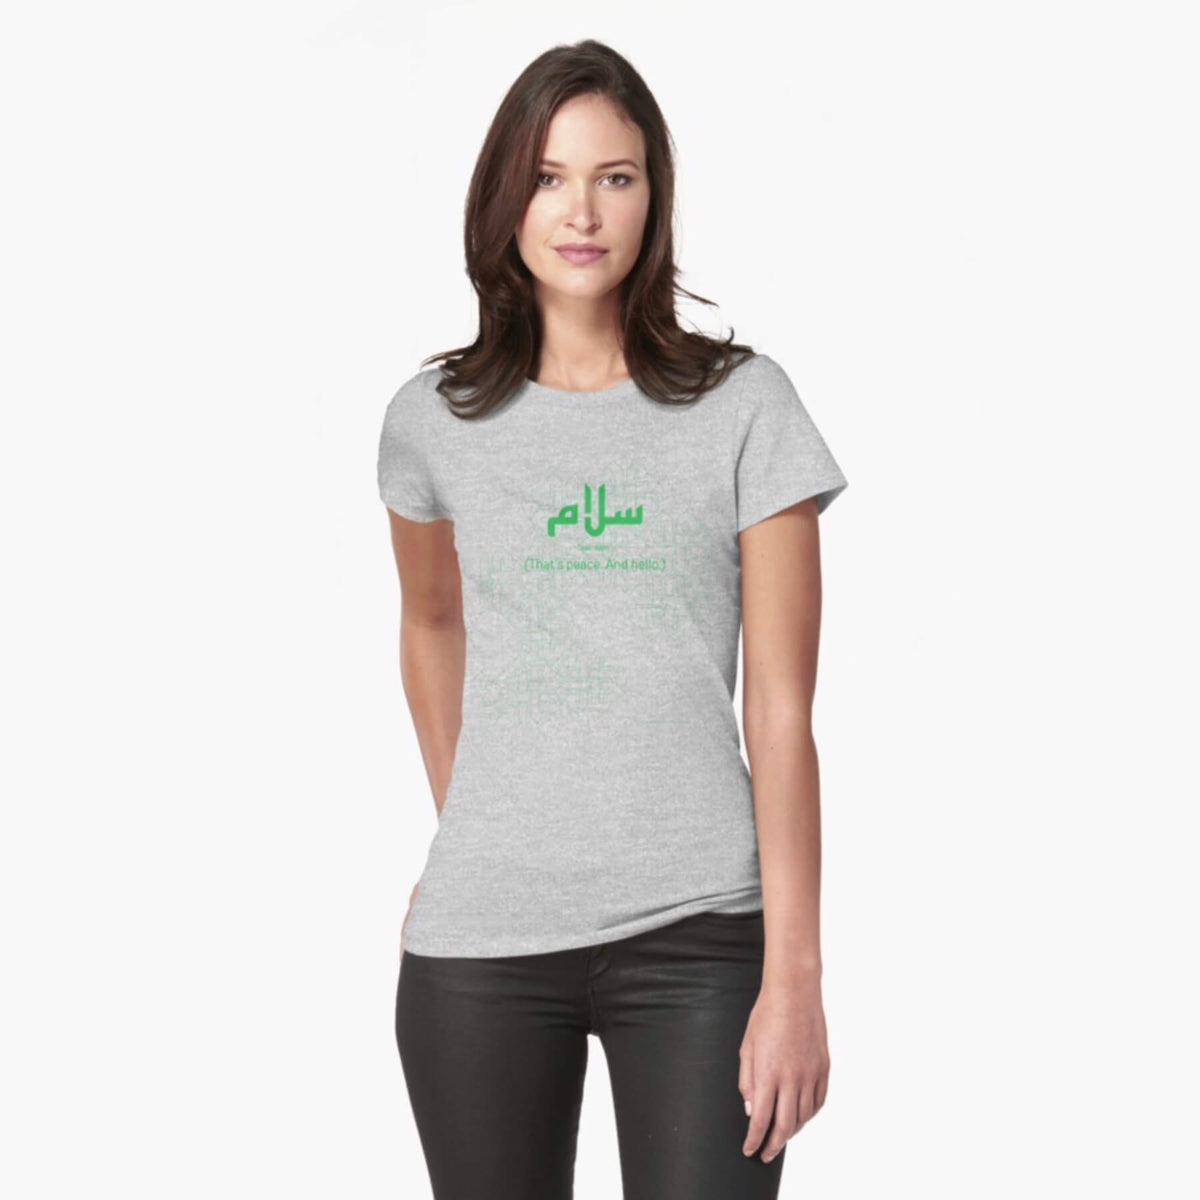 A white female model with hazel eyes and brown shoulder-length hair wears the Haluna Happy Names exclusive &#39;Salaam—Arabic Key Words&#39; design  fitted t-shirt in light grey marle ,and tight black jeans. The word &#39;salaam&#39; is written in green in Arabic with a kufic-style font, and beneath it in English the words &quot;Sal-aam&quot; and beneath that the words &#39;(That means peace. And hello)&#39;. The text is positioned on the tshirt so it falls across the chest of the model against a complementary green background pattern.